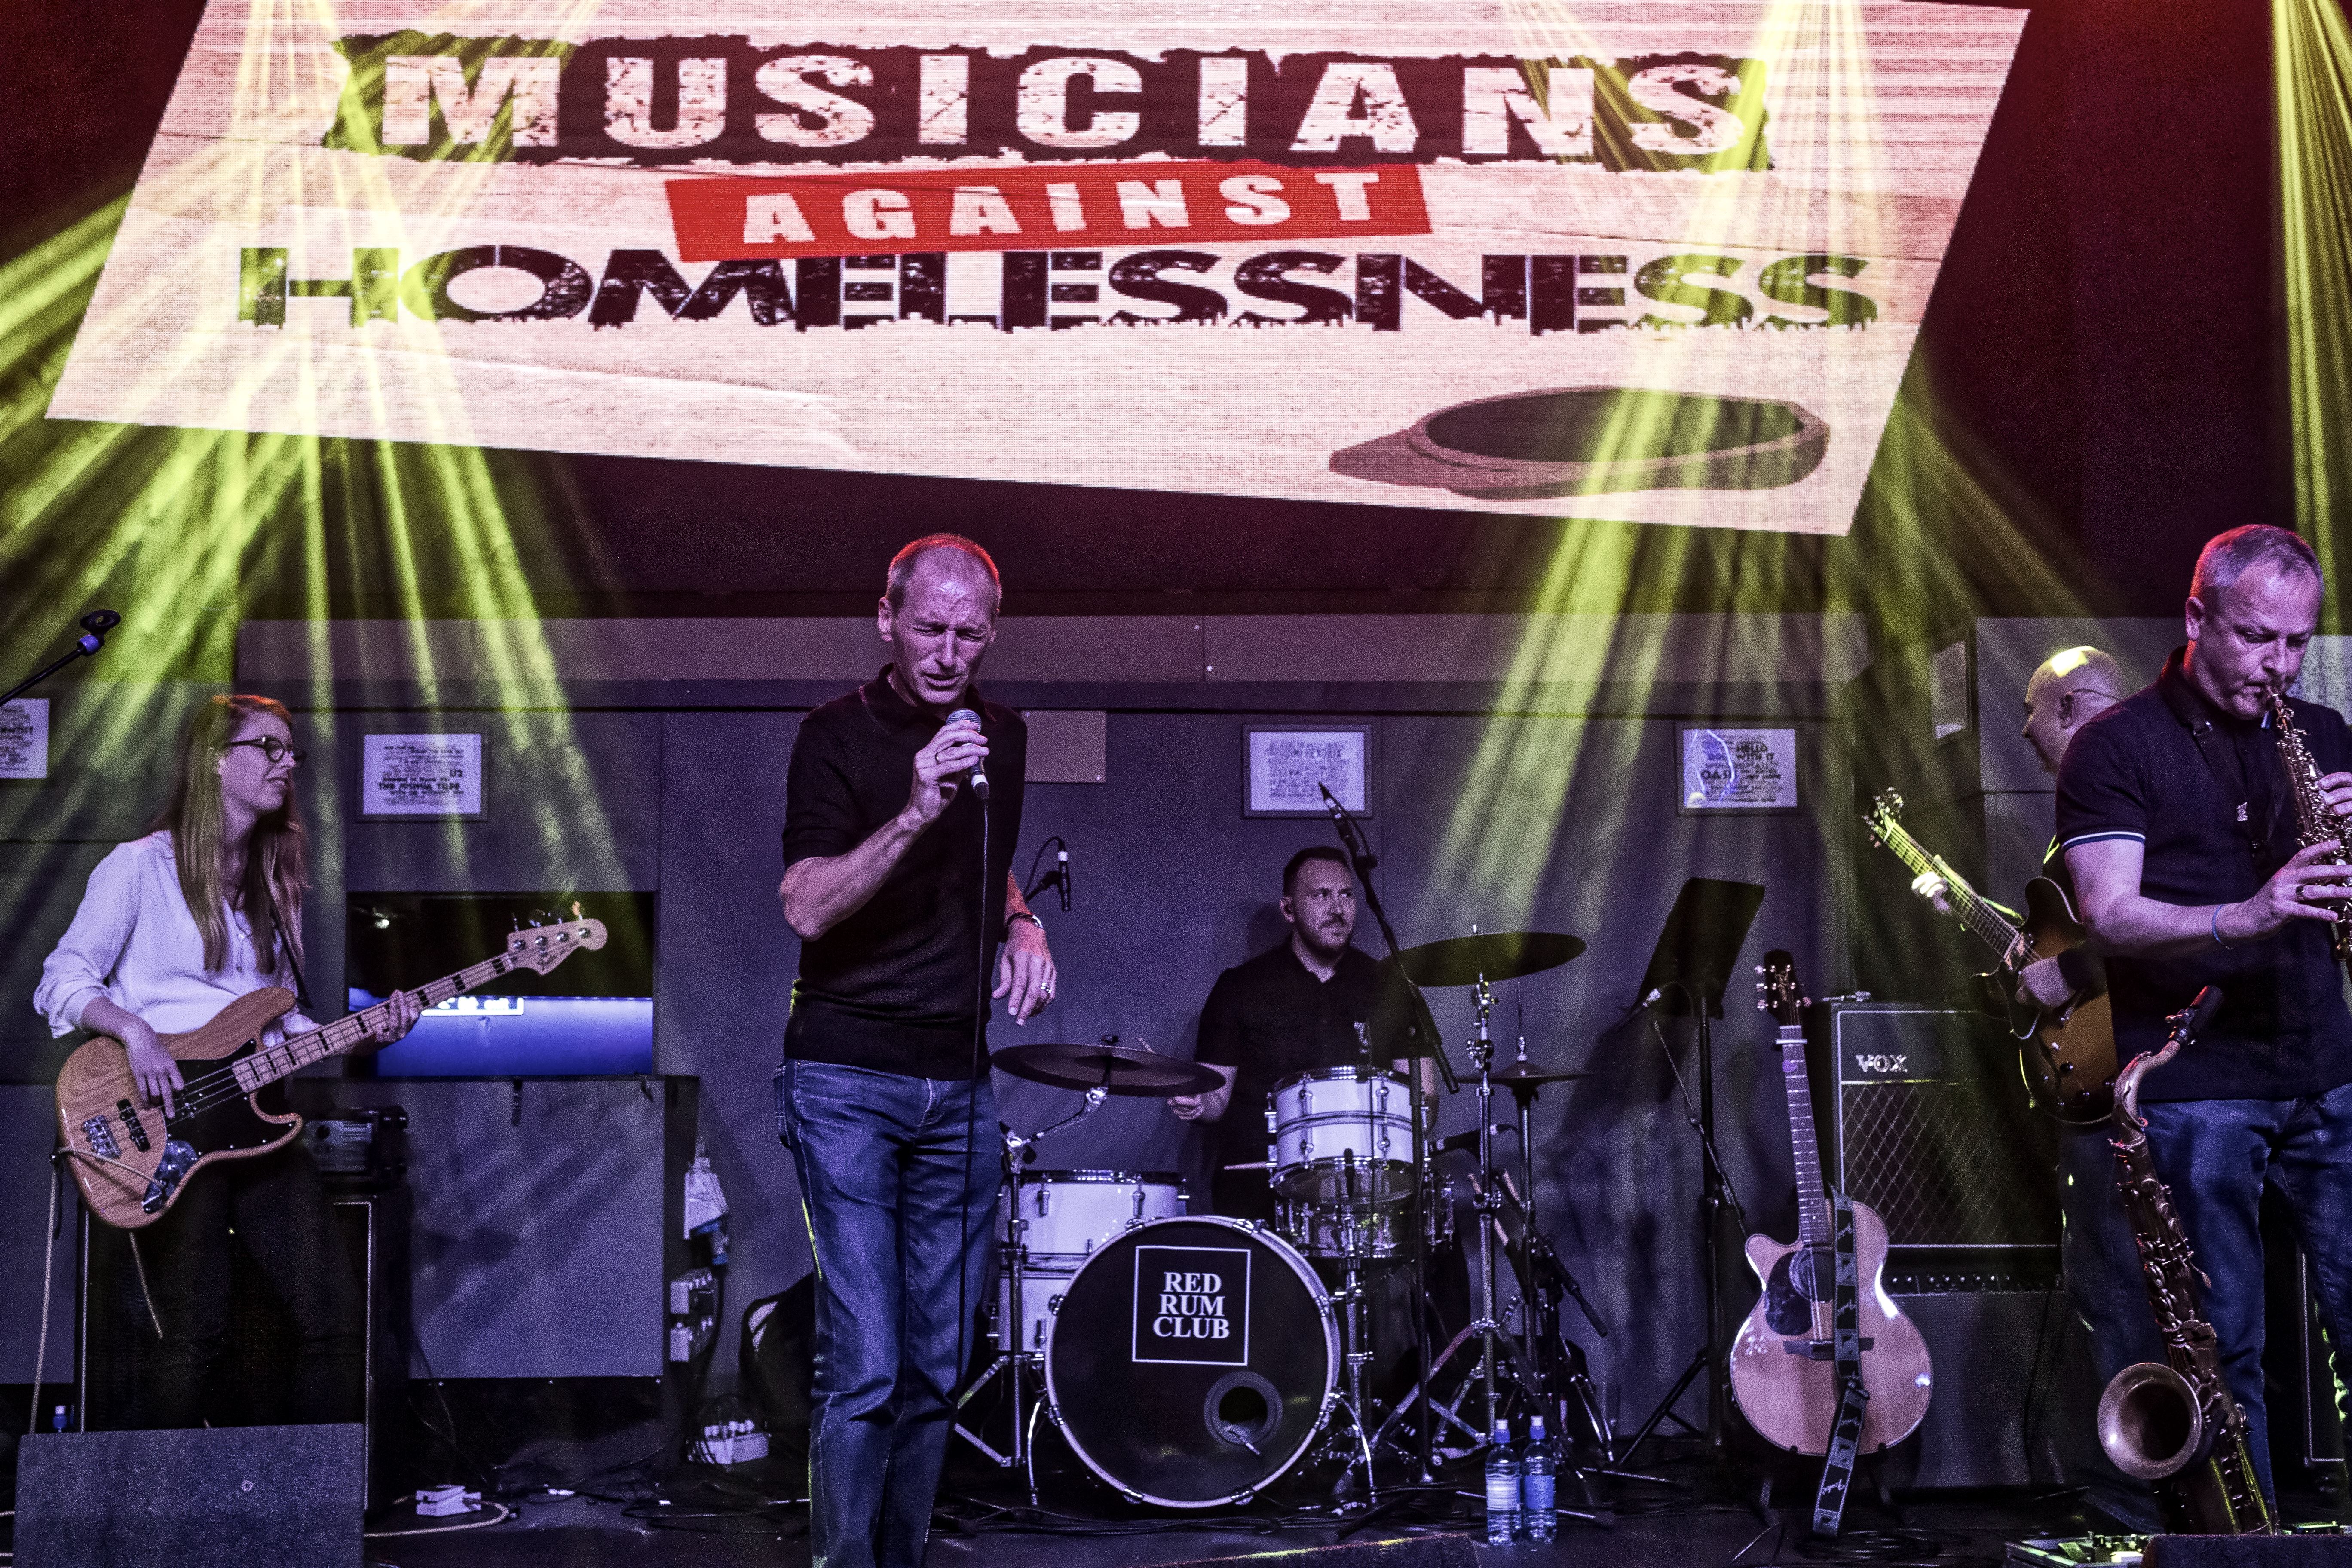 Musicians Against Homelessness Liverpool 2017 – Review